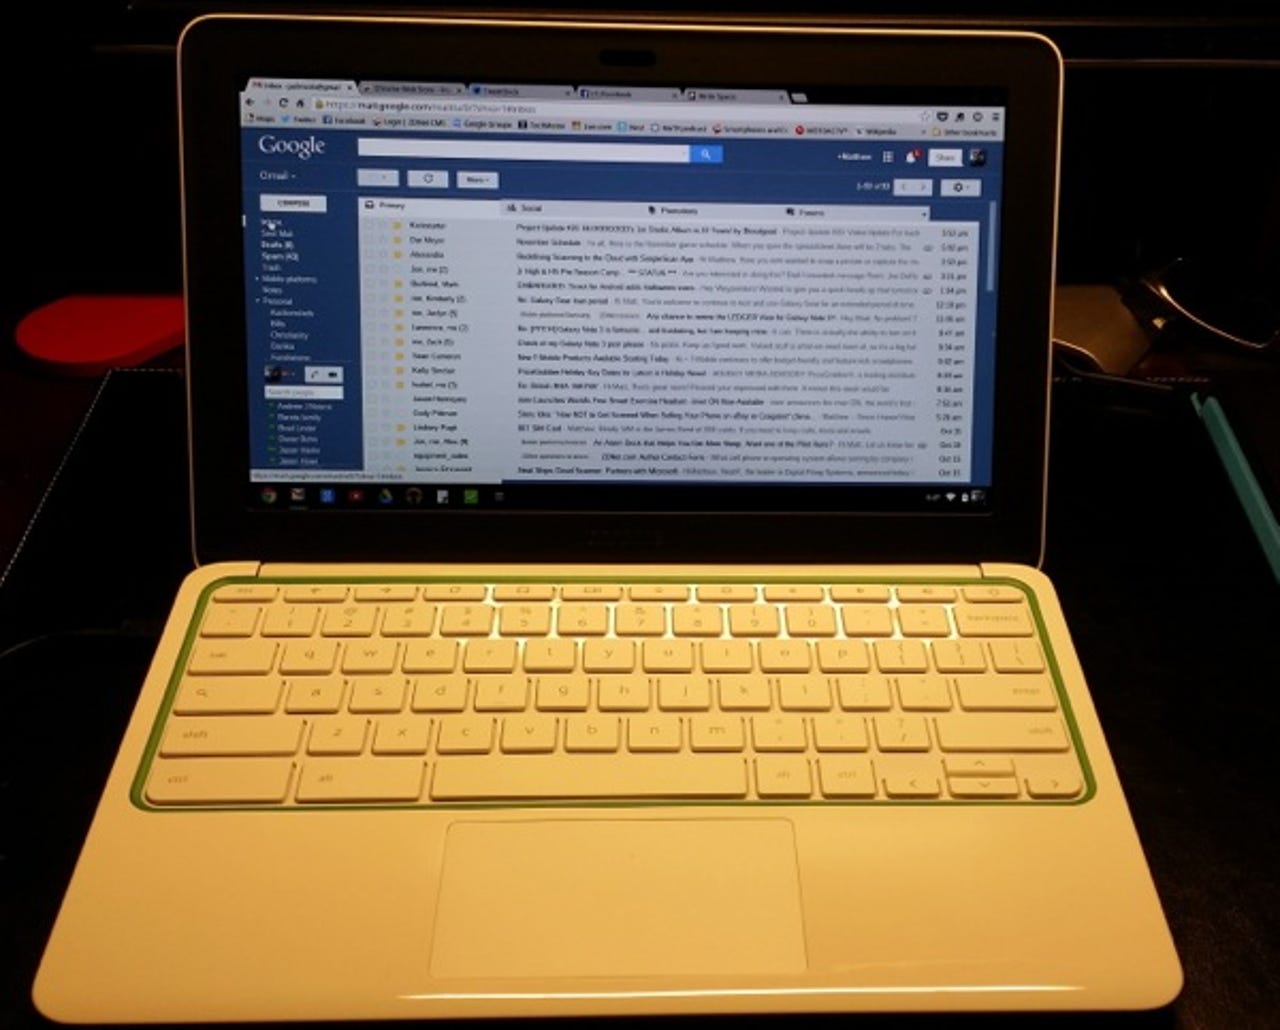 HP Chromebook 11 hands on: Distraction-free writing with vivid display